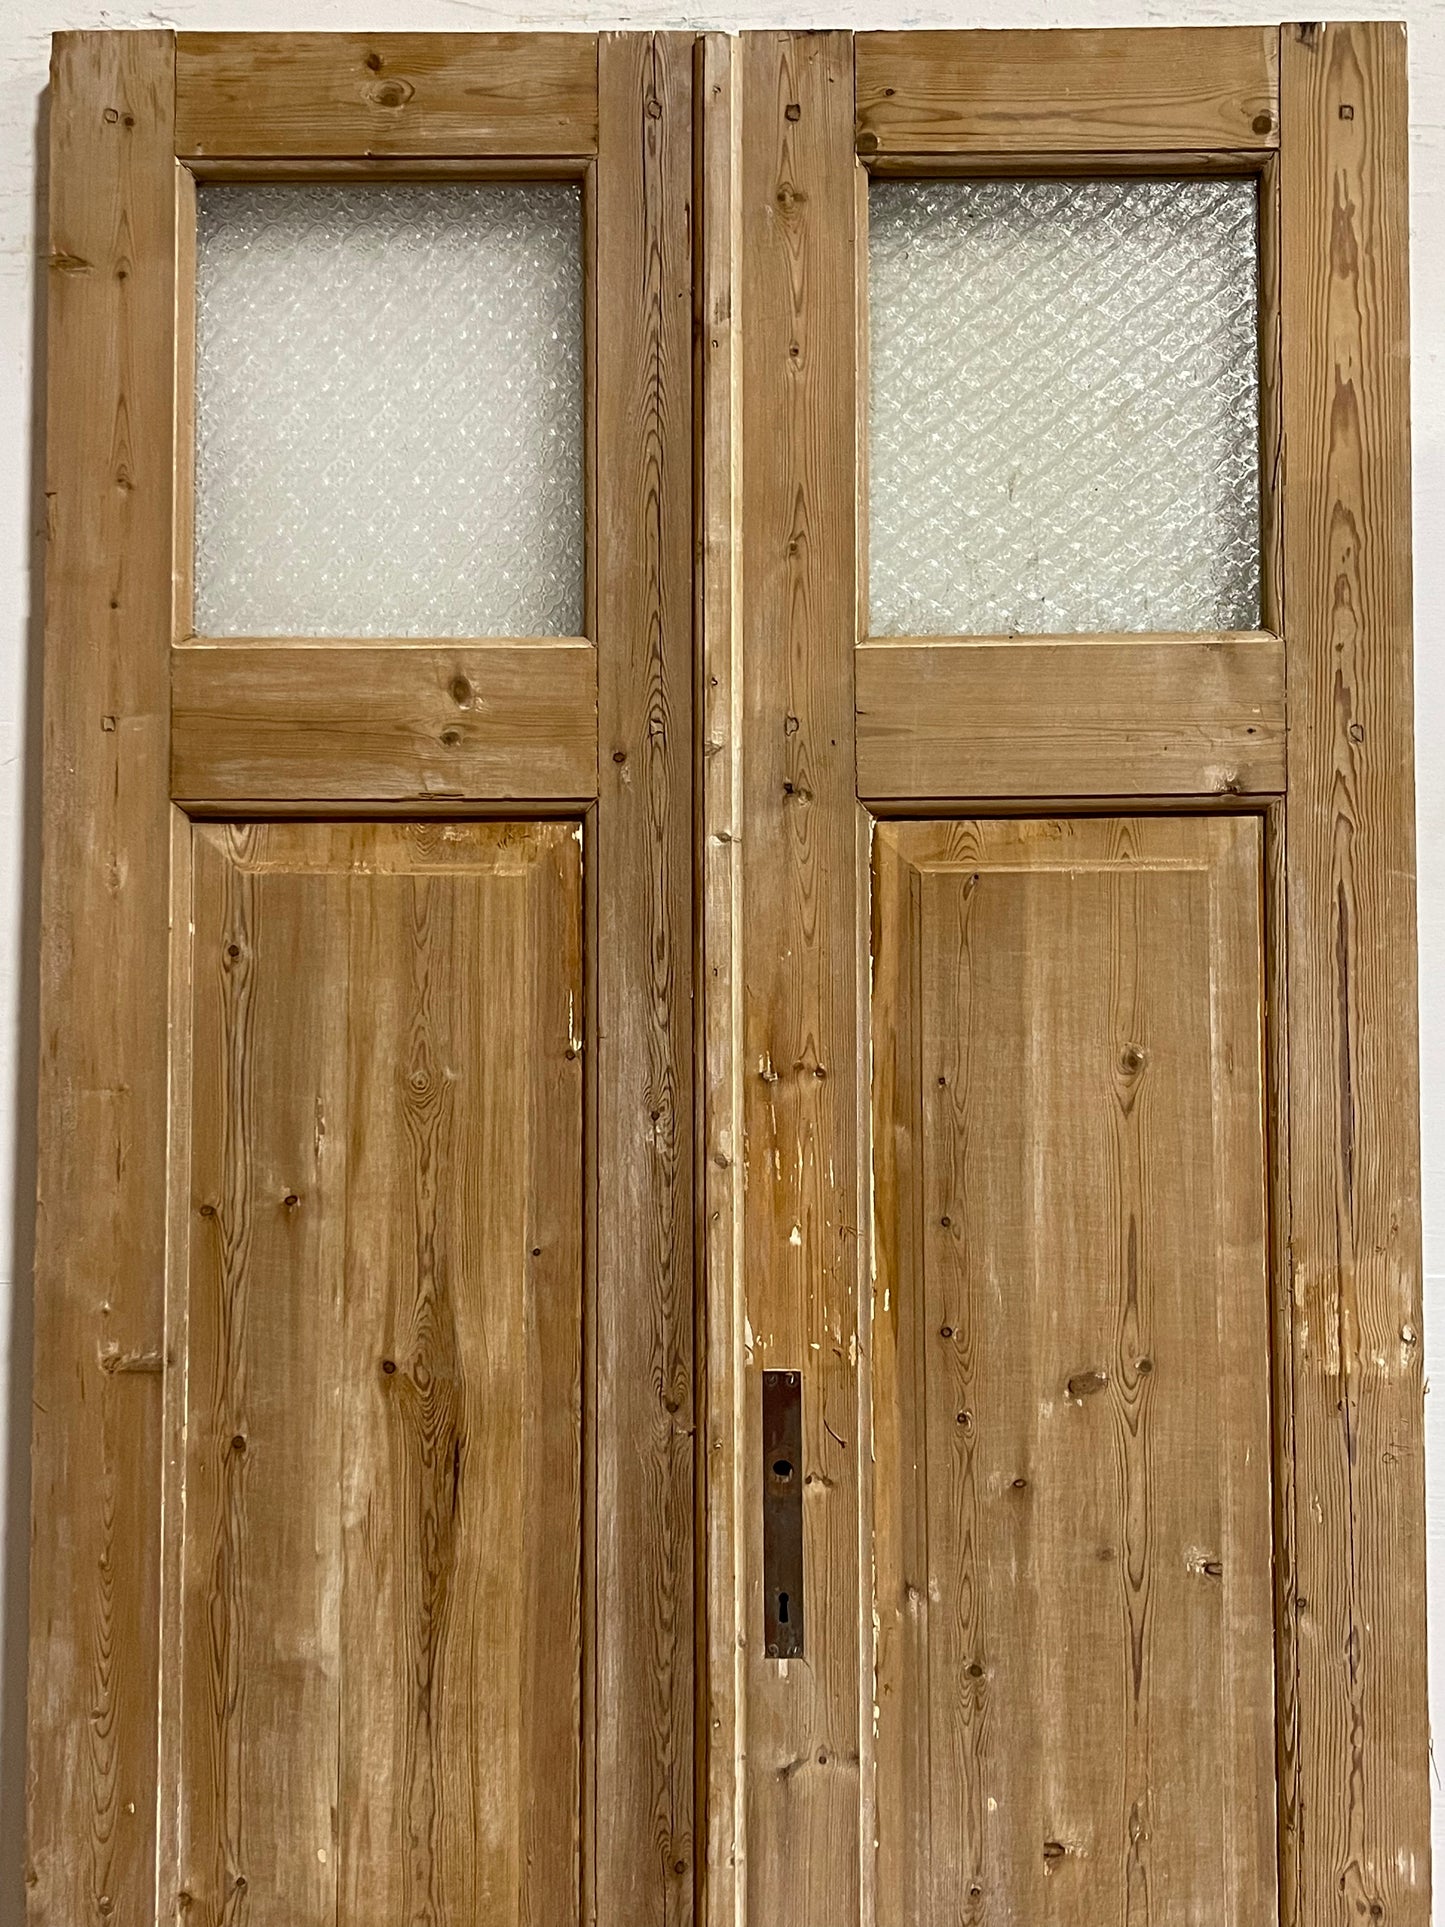 Antique French Panel Doors withg Glass (85.25x40.25) J328